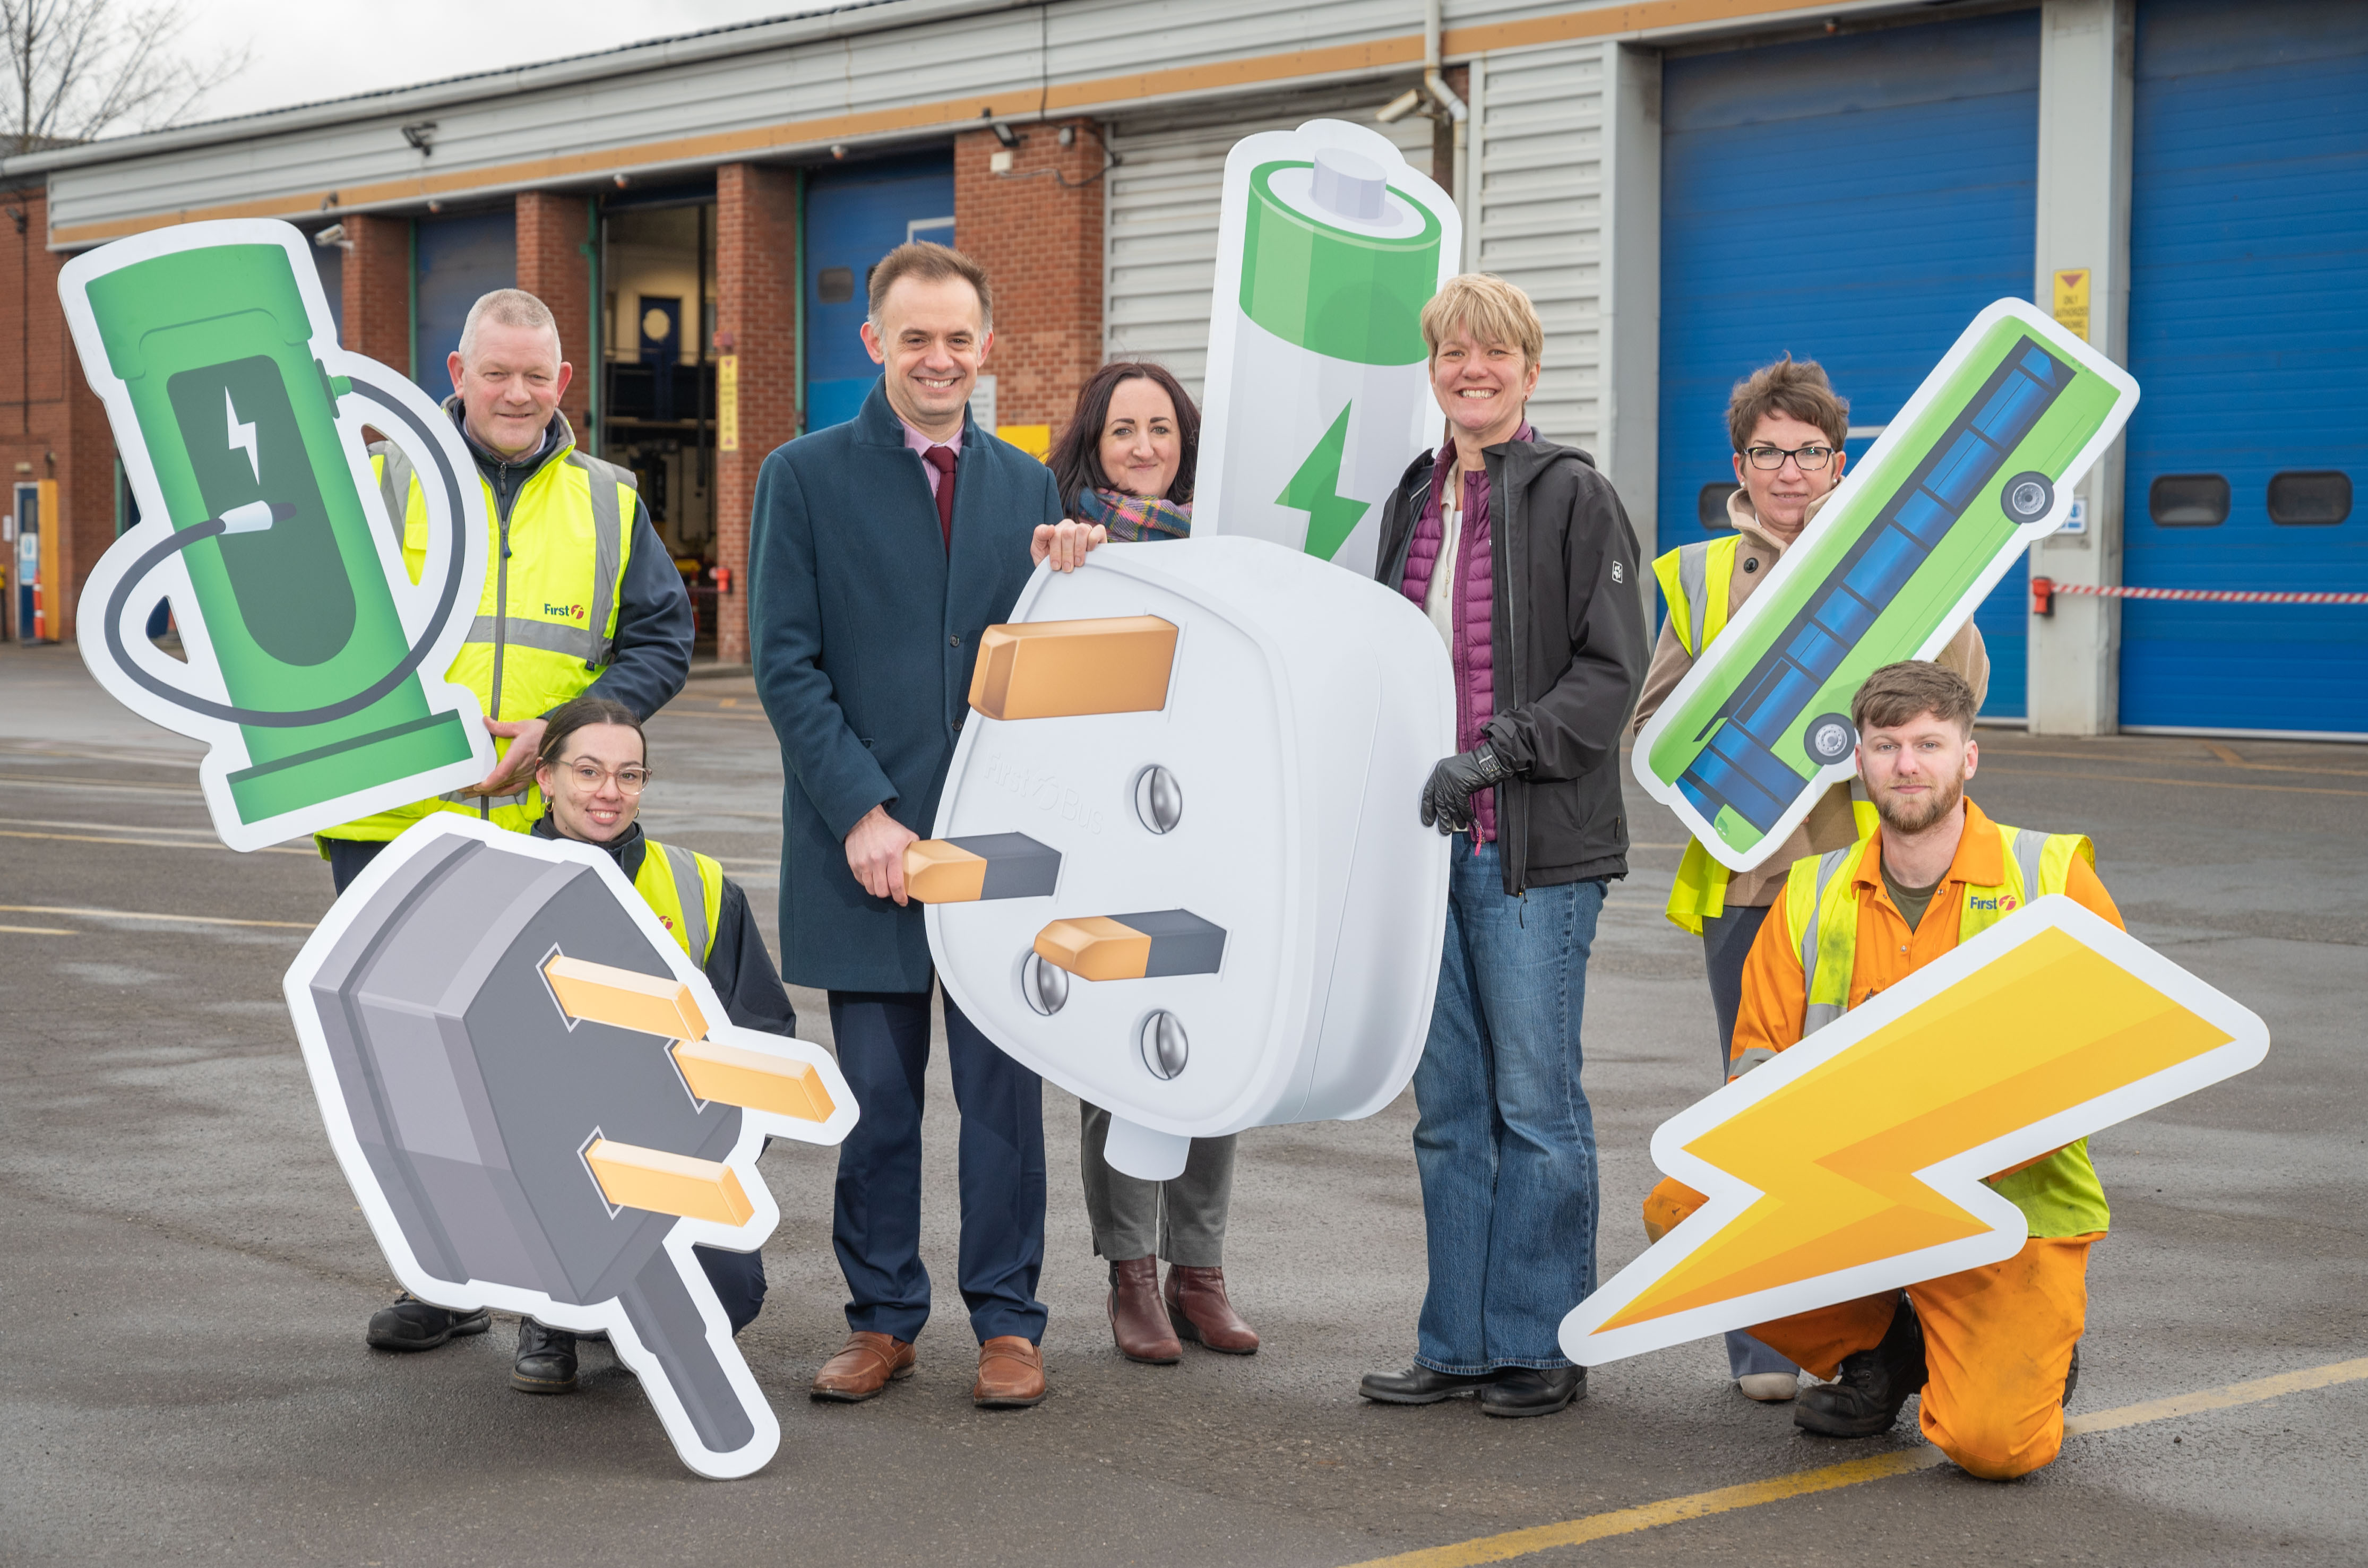 First commits £35m additional investment in electrification